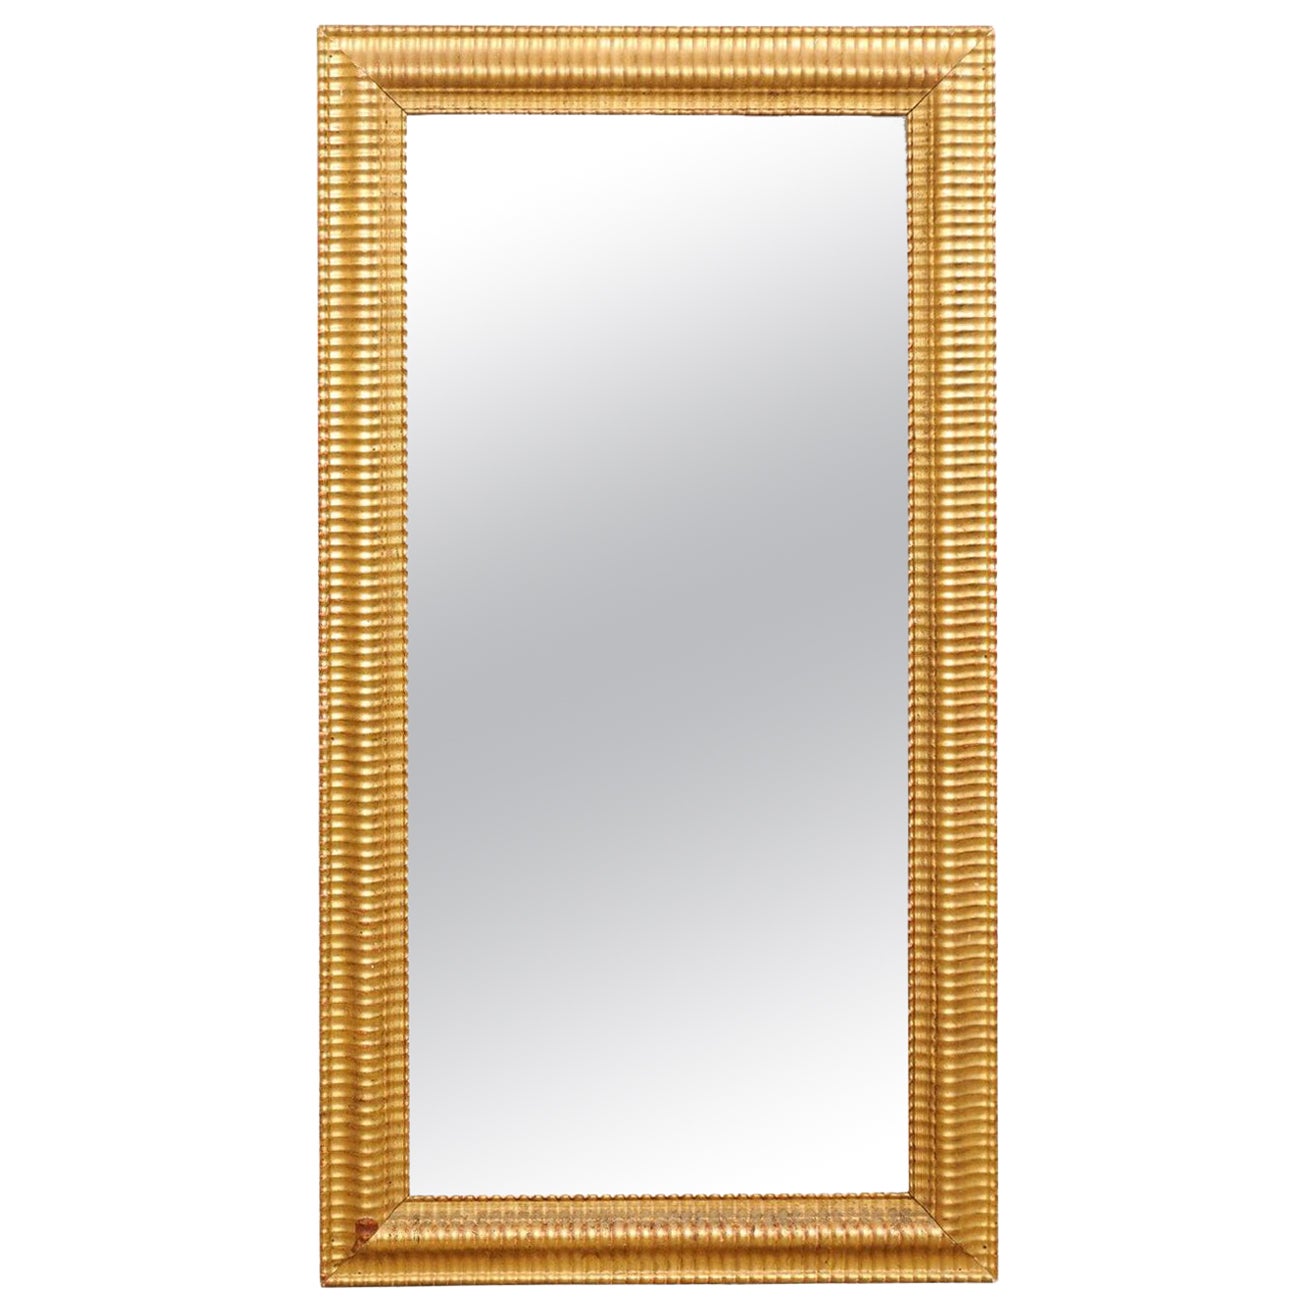 19th C. French Rectangular-Shaped, Carved & Gilt Wood Mirror For Sale